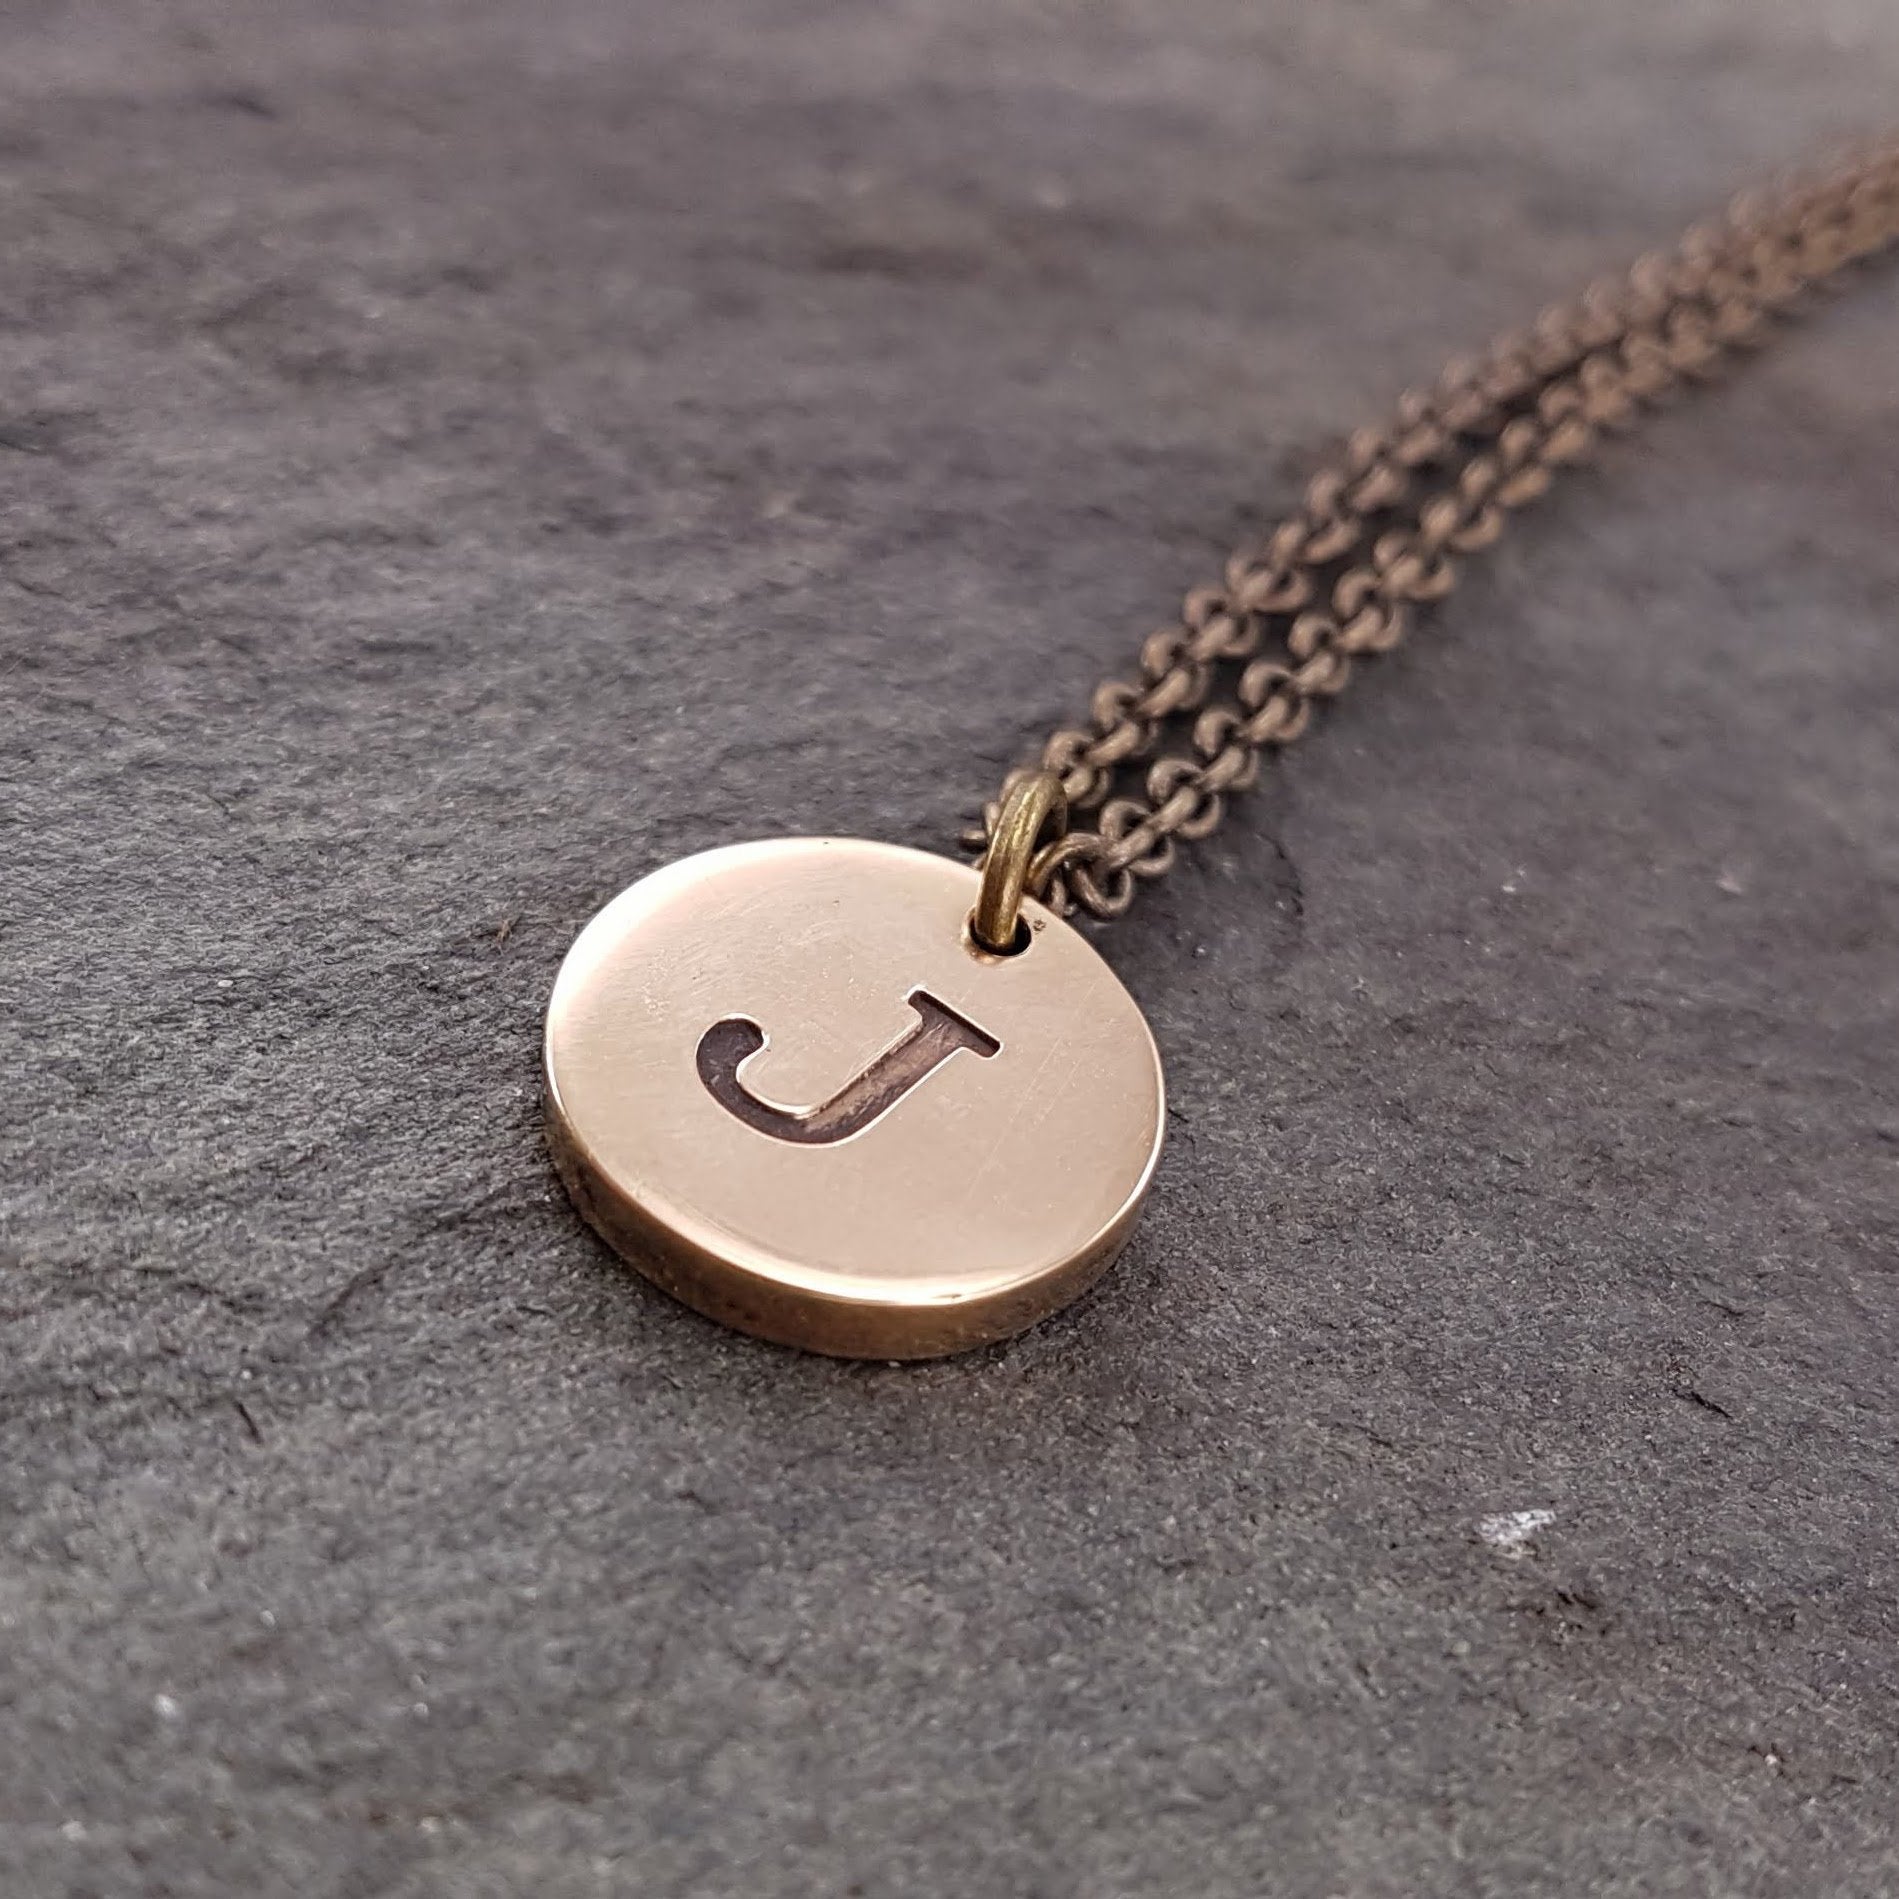 Engraved Initial Charm Necklace - Solid Bronze Monogram Pendant